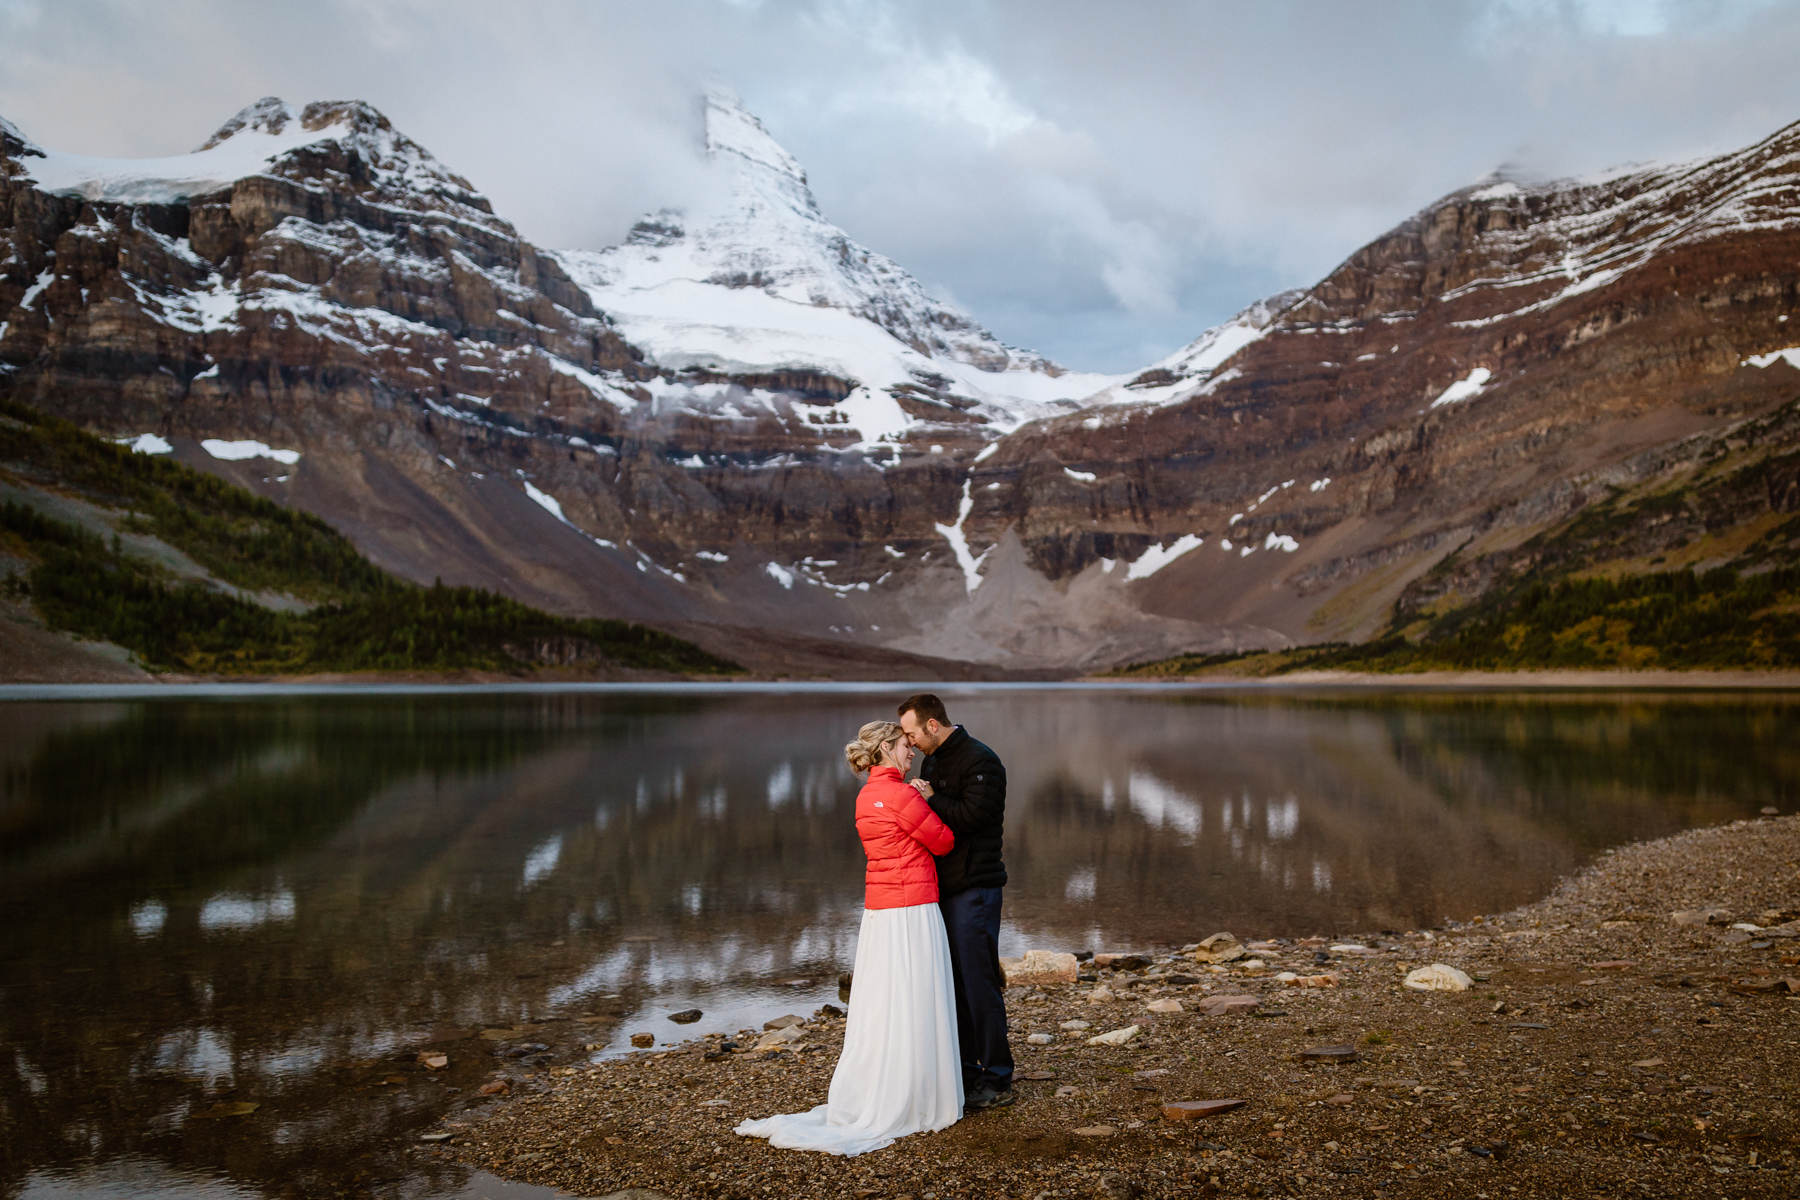 Mount Assiniboine Elopement Photographers at a Backcountry Lodge - Photo 45